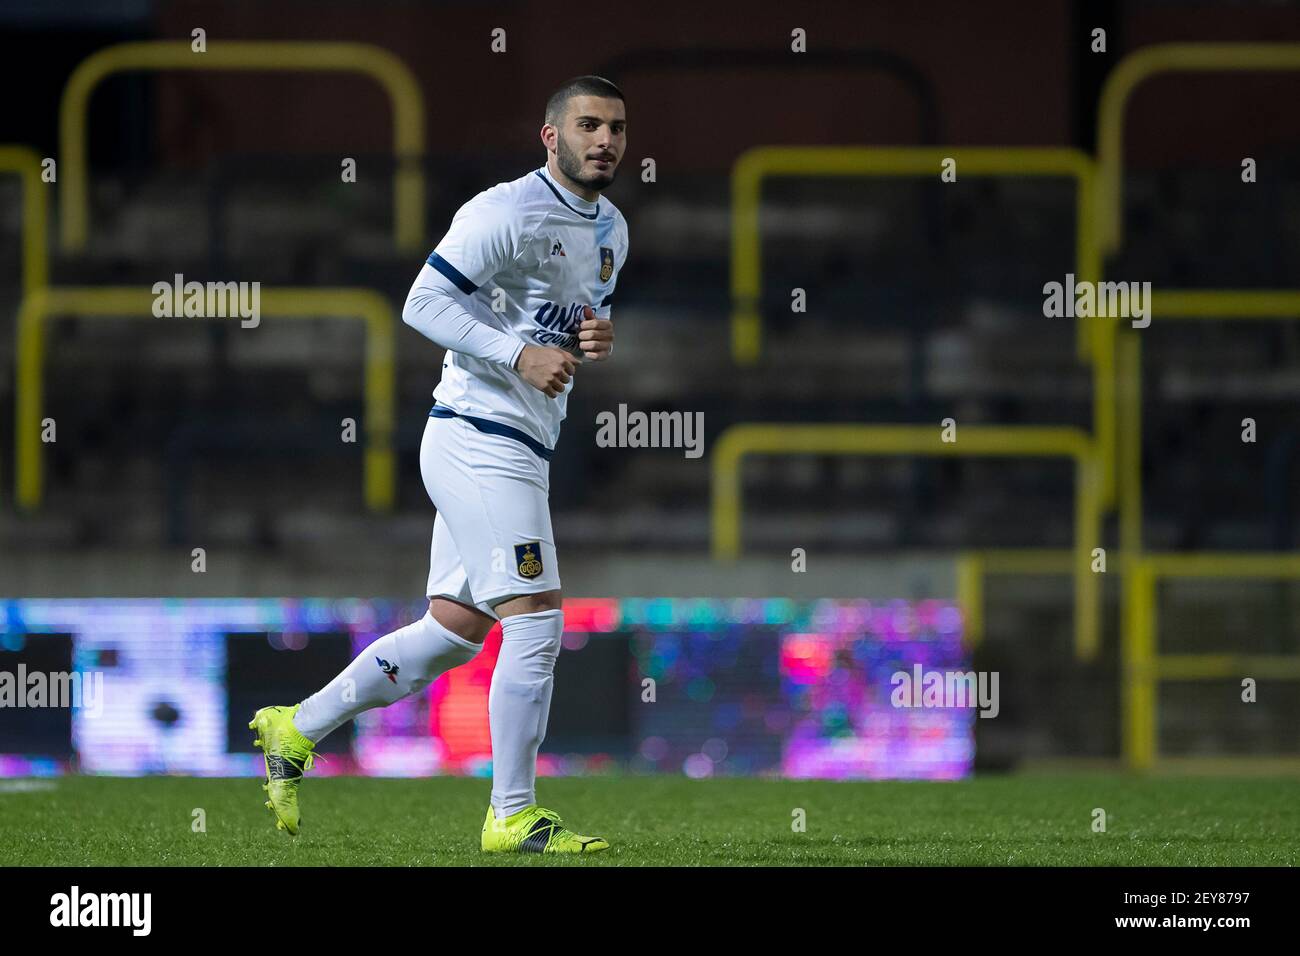 Union's Deniz Undav pictured after scoring during a soccer match between Lierse Kempenzonen and Union Saint-Gilloise, Friday 05 March 2021 in Lier, on Stock Photo